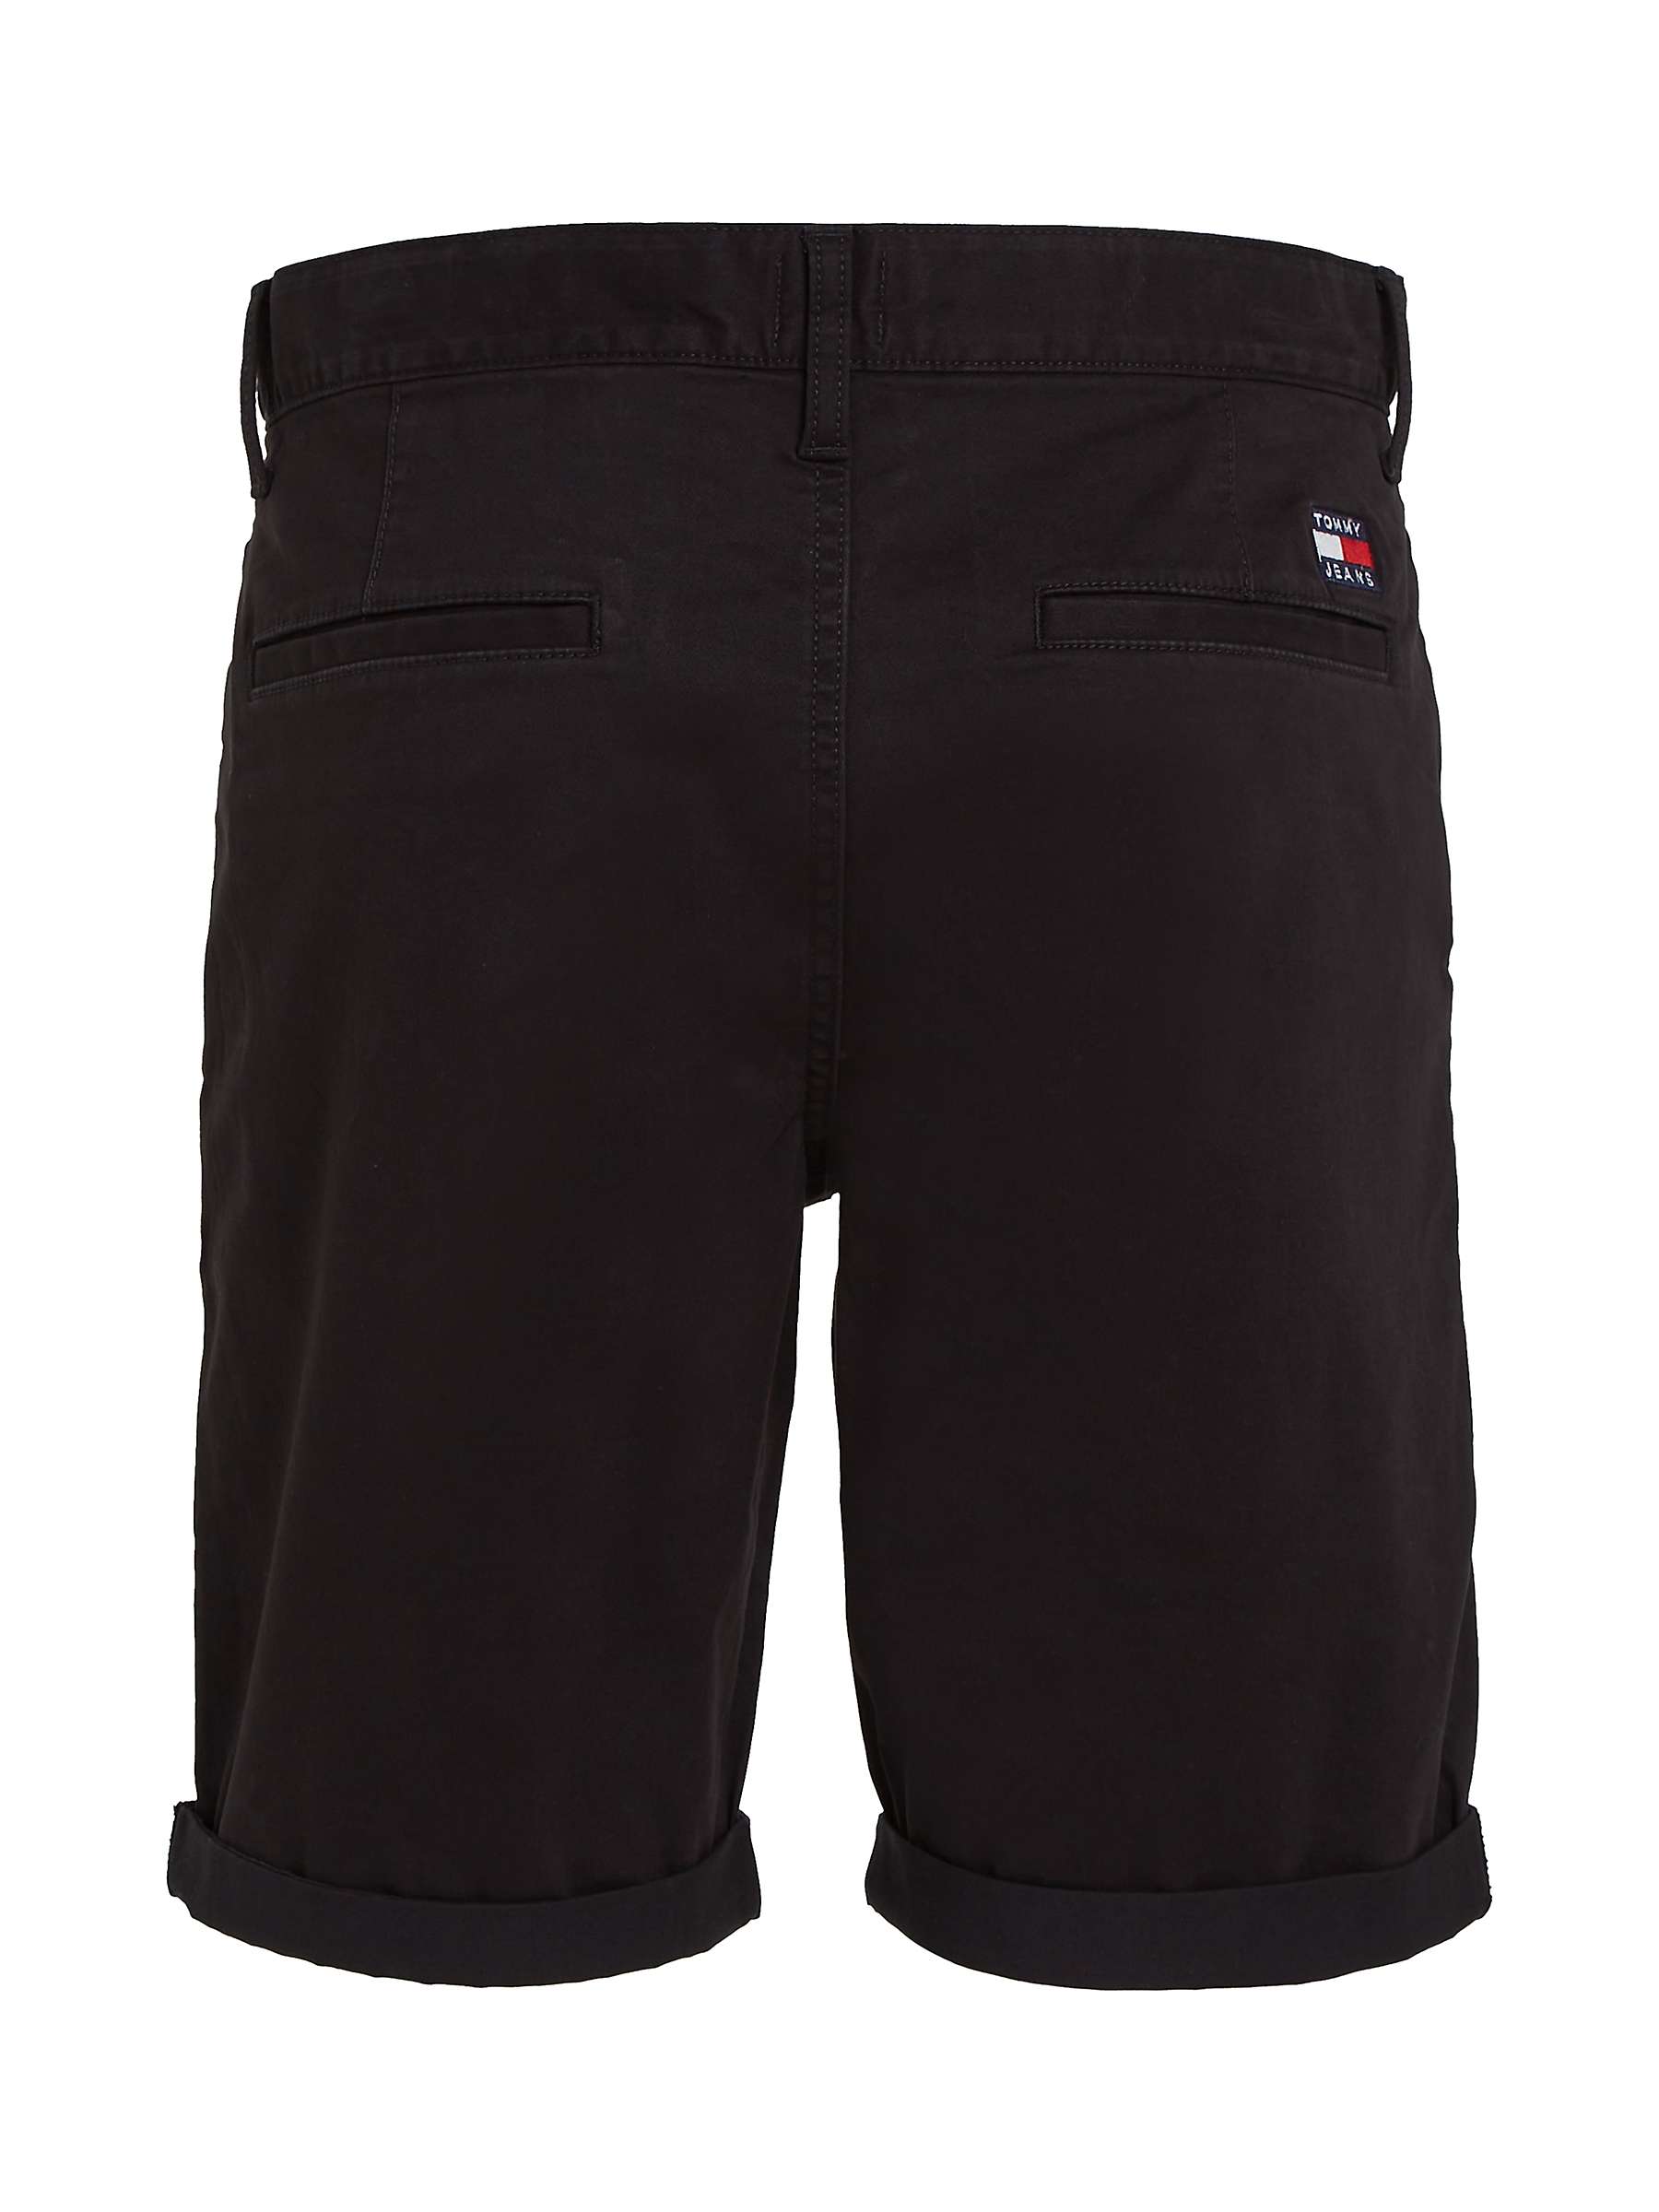 Buy Tommy Jeans Scanton Chino Shorts Online at johnlewis.com